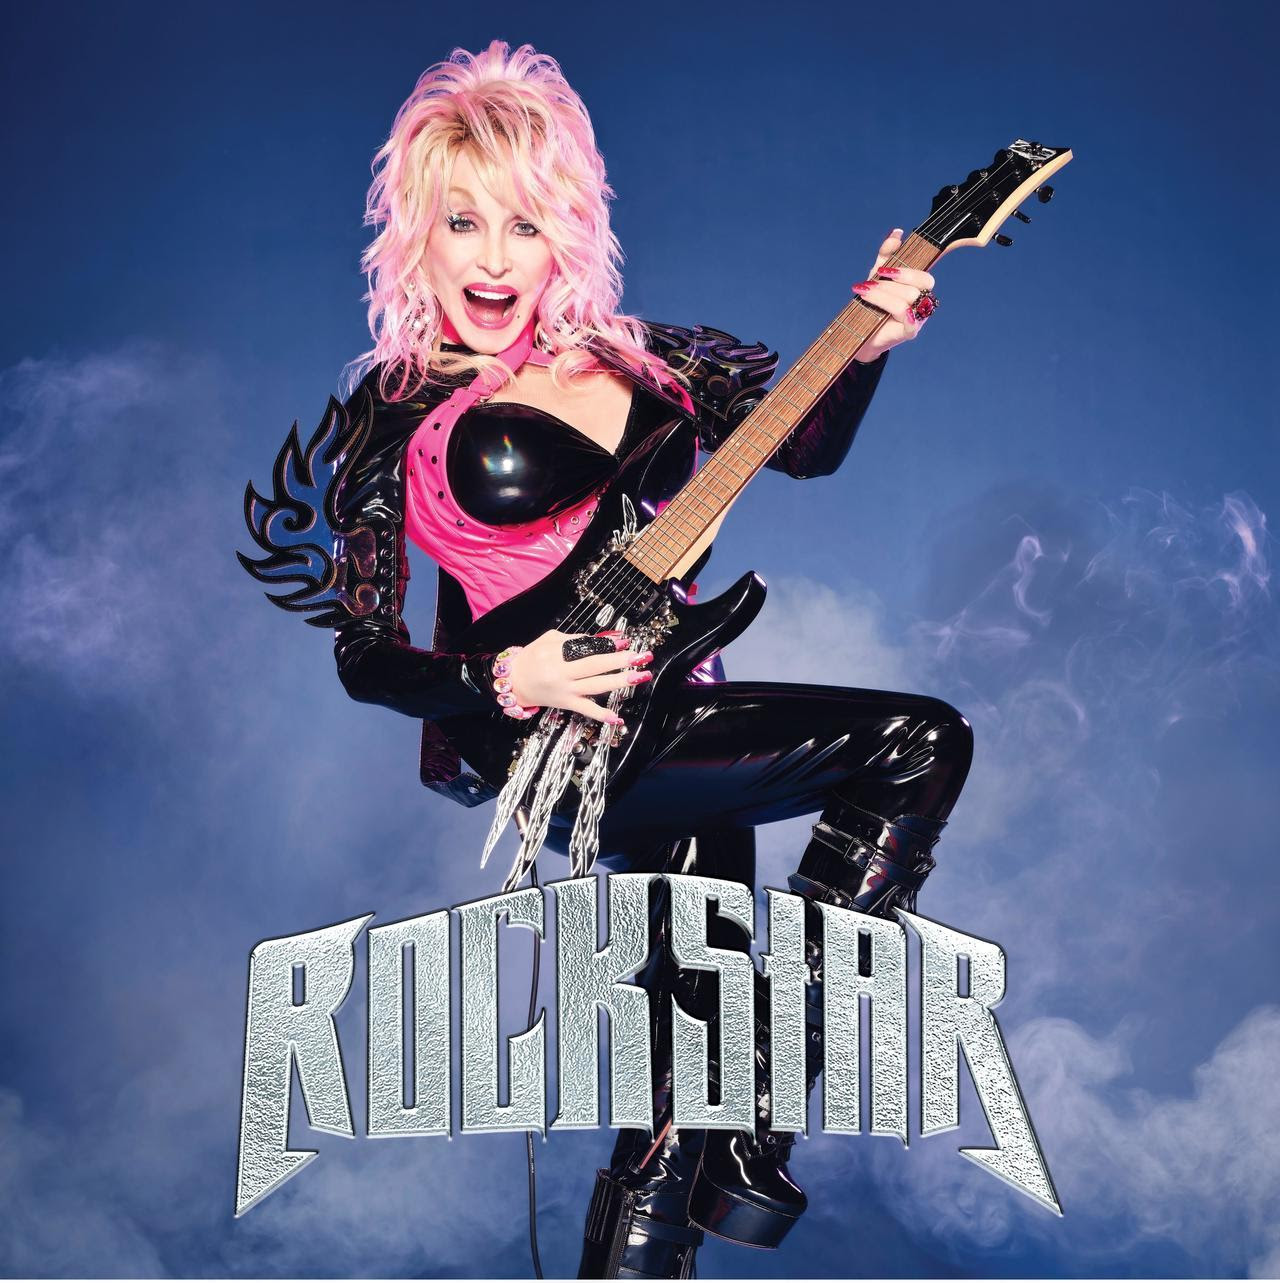 New Music Friday: Dolly Parton Releases First Ever Rock Album “Rockstar”